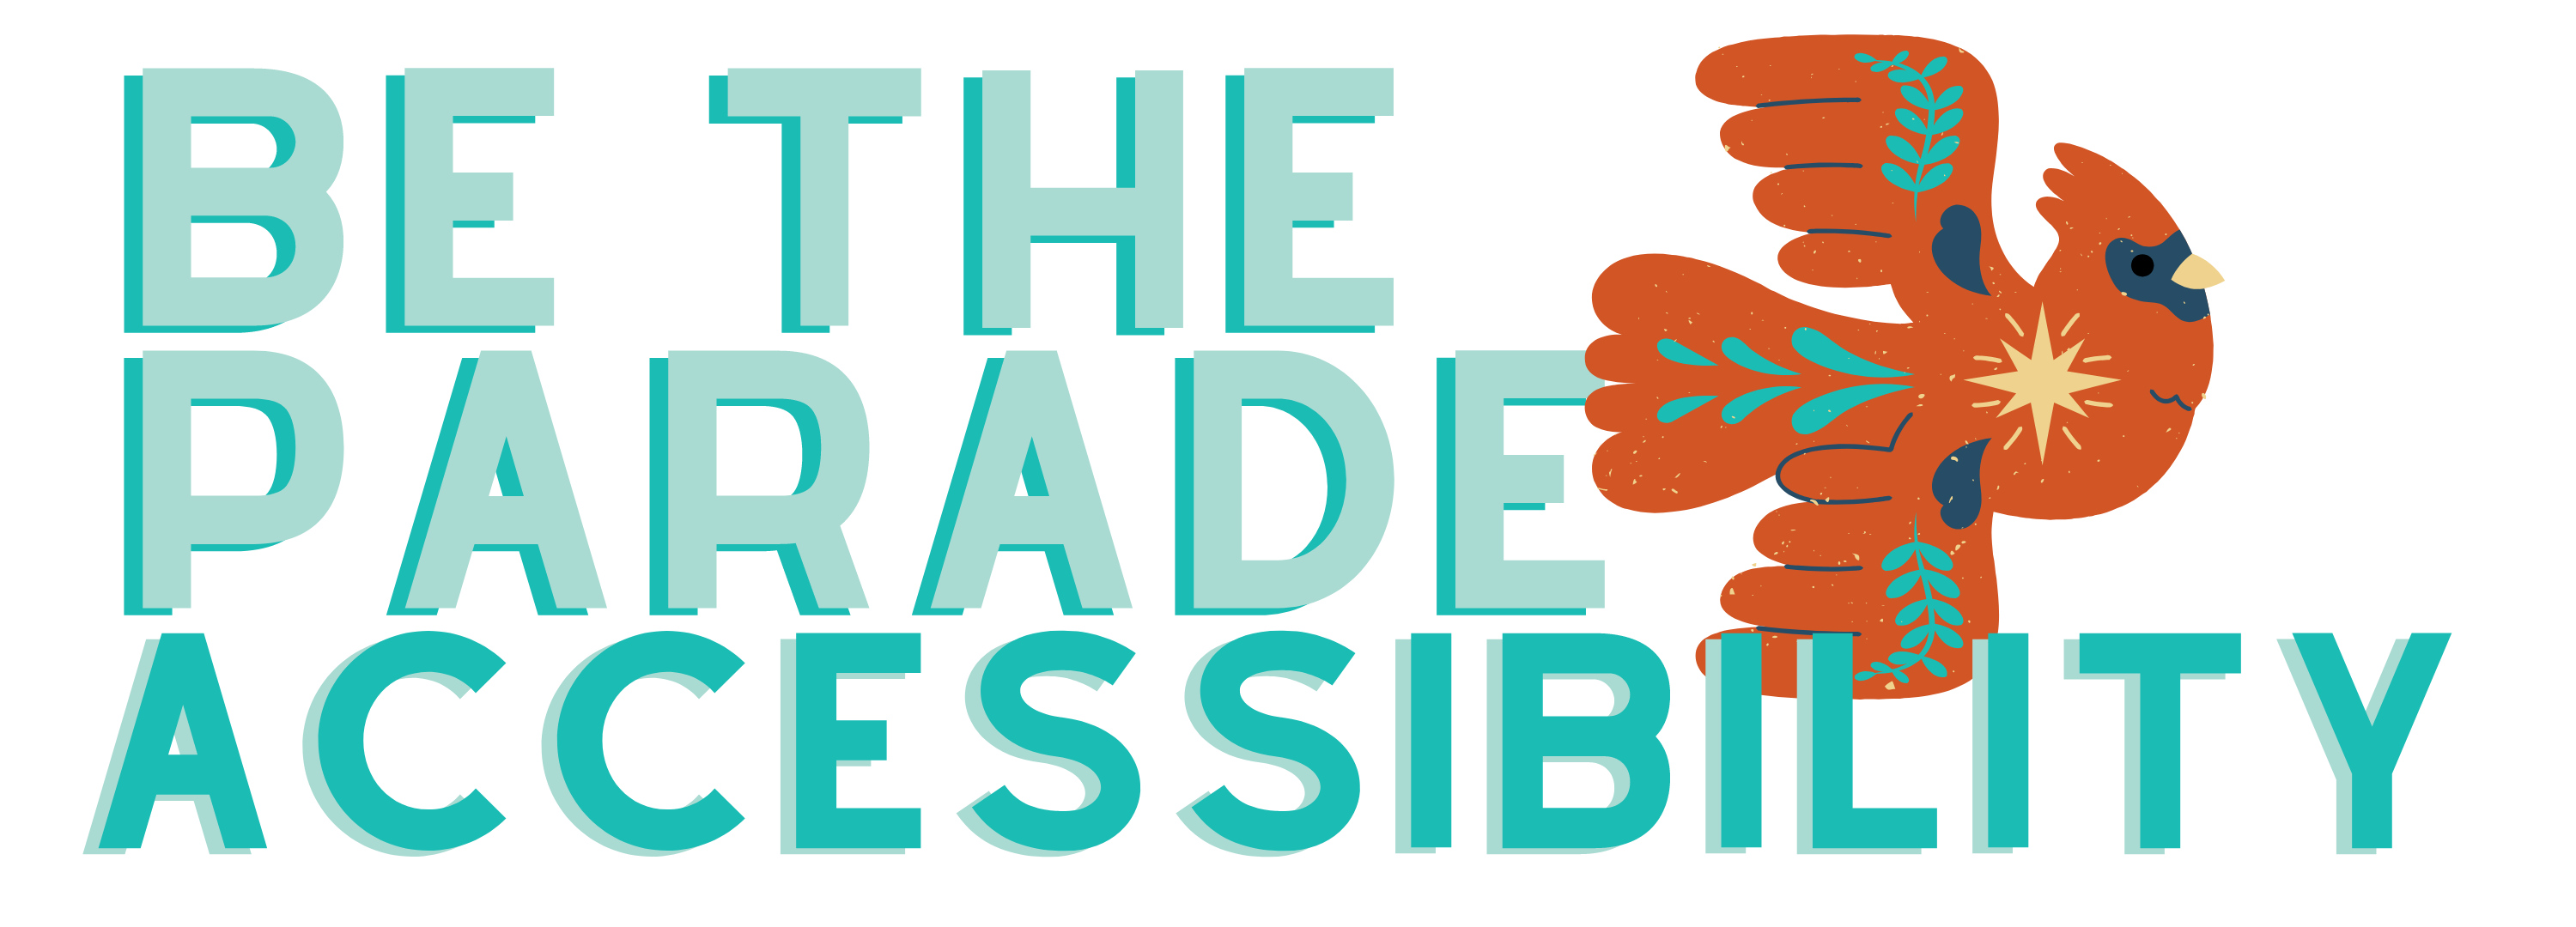 be the parade accessibility